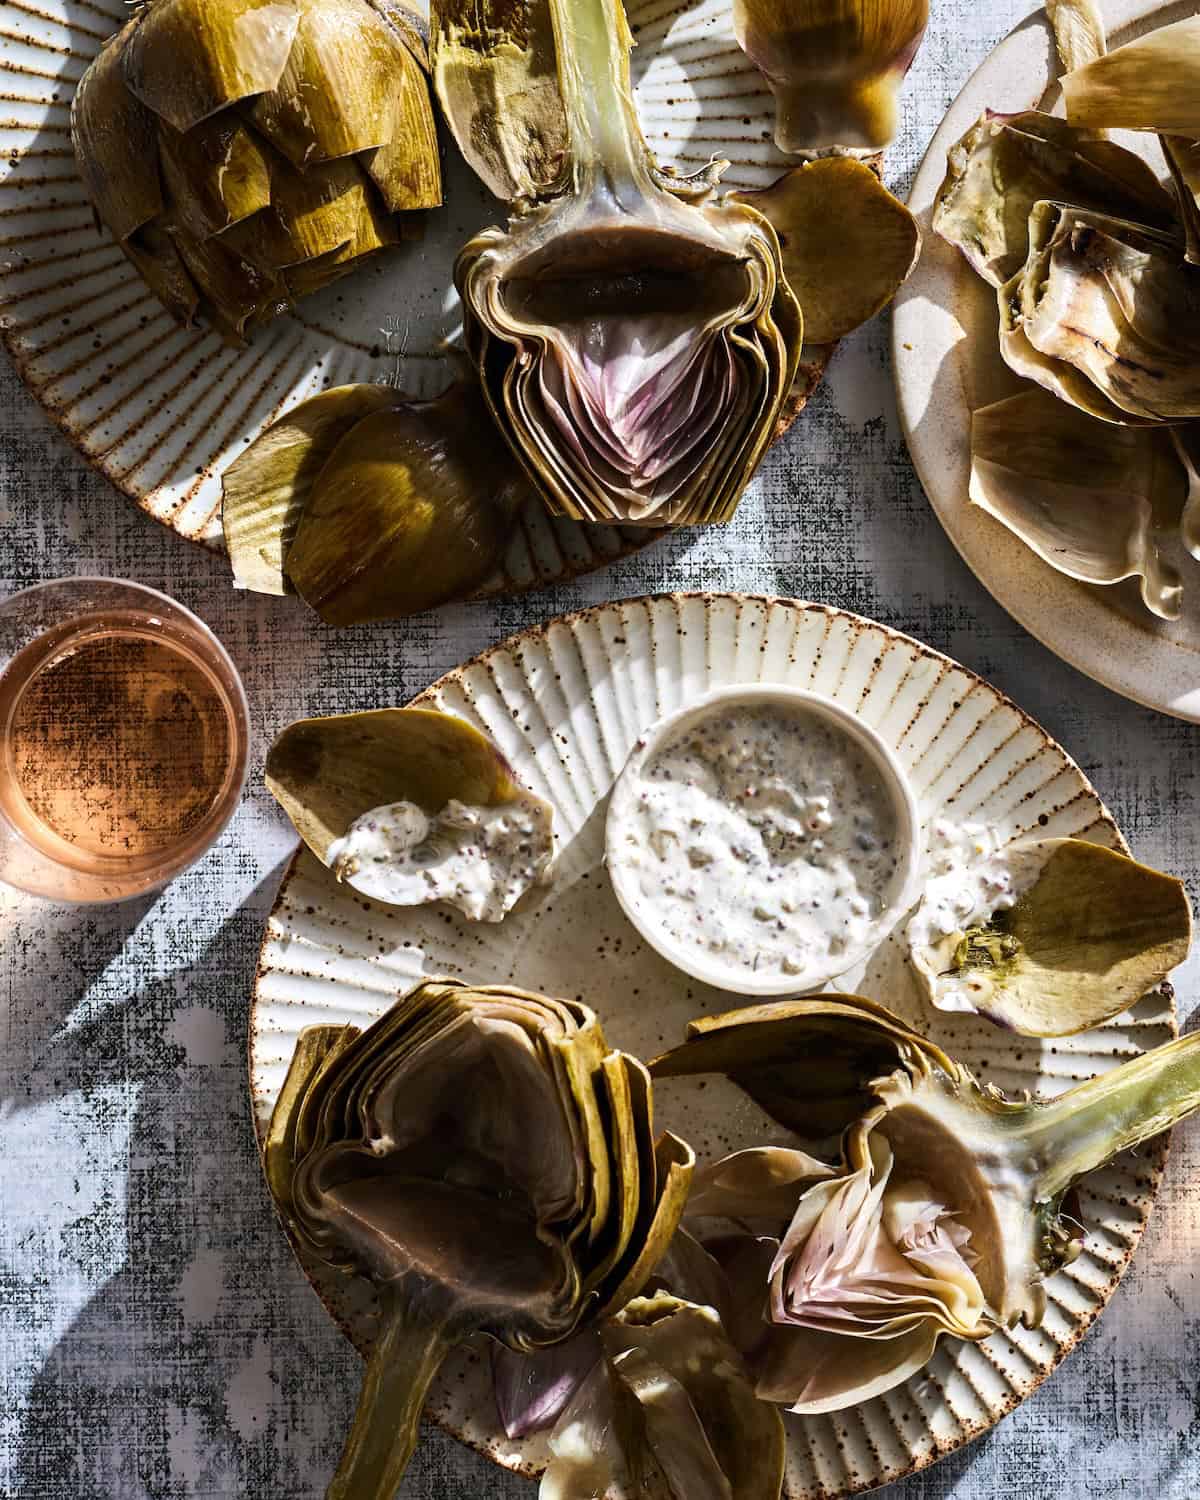 An assortment of Steamed Artichokes with a Caper Dipping Sauce